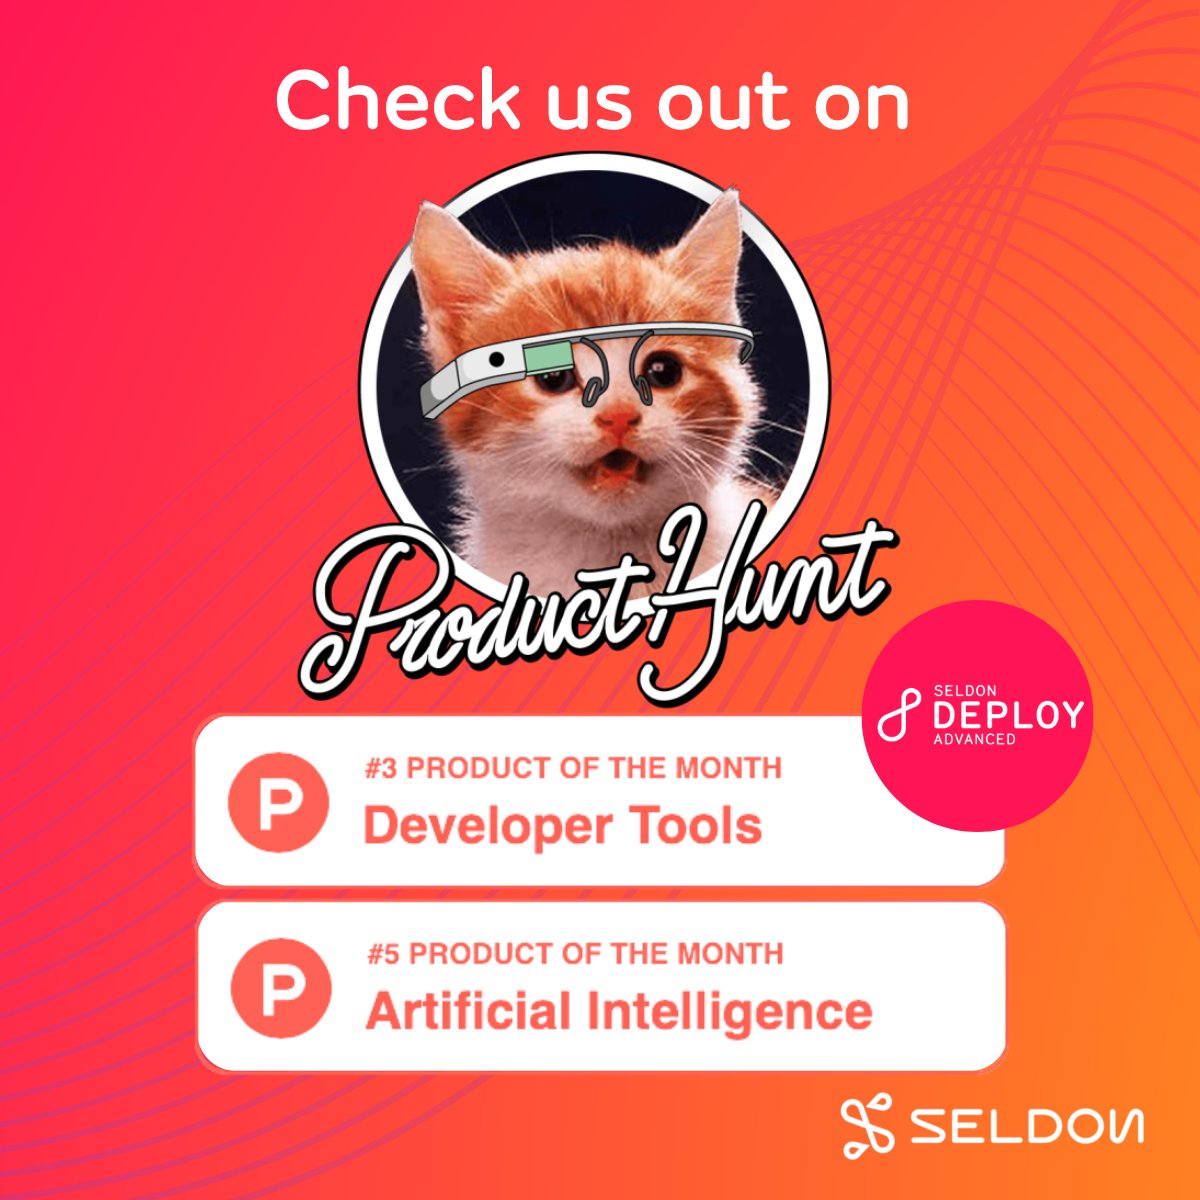 Exciting news! 🎉 Seldon Deploy Advanced has been awarded... #3 Developer Tools product of the month #5 Artificial Intelligence product of the month If you haven't tried out our tools yet, now is the perfect time. Check us out on Product Hunt here: buff.ly/3Gi4s7m